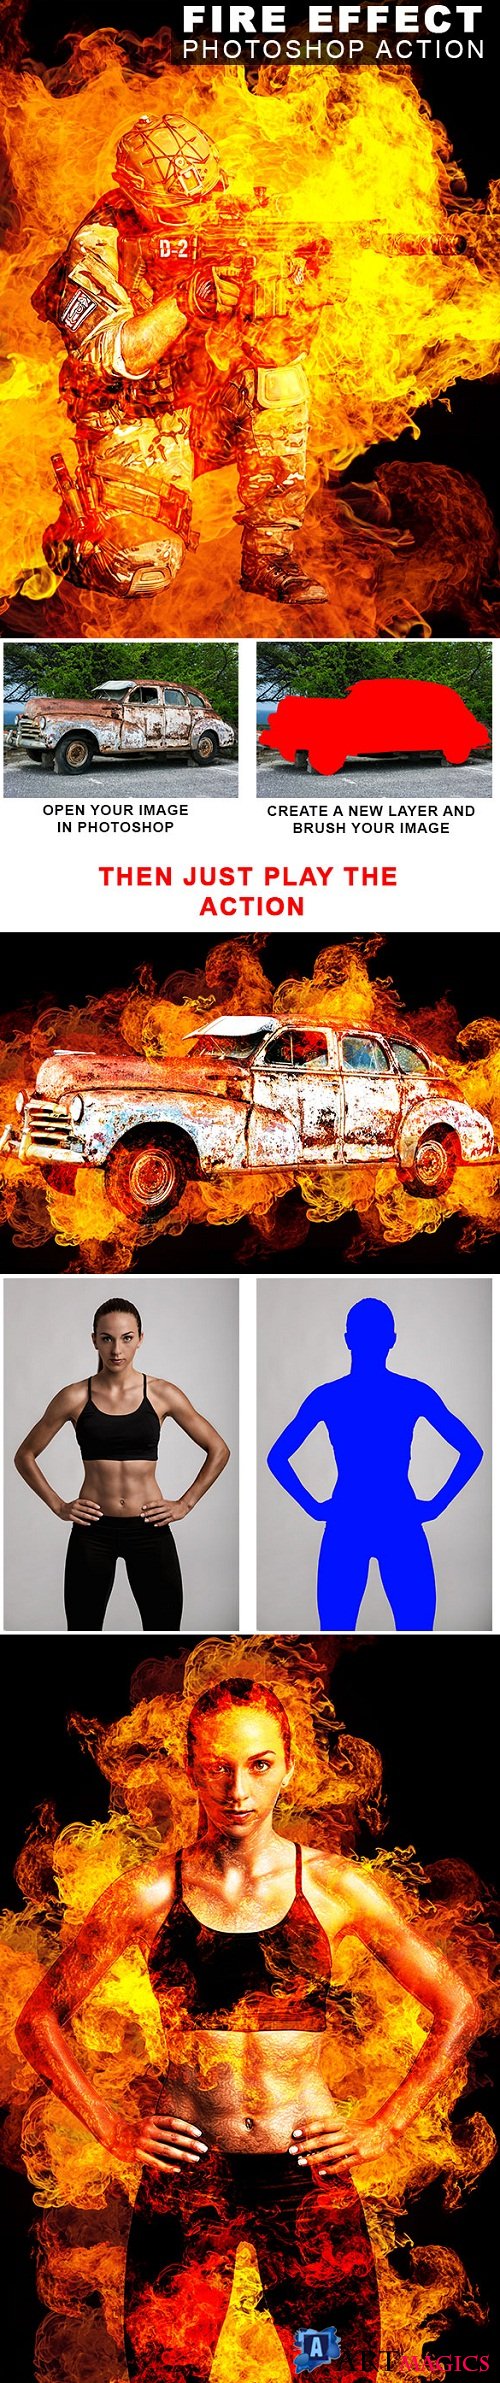 Fire Effect Photoshop Action  21985670